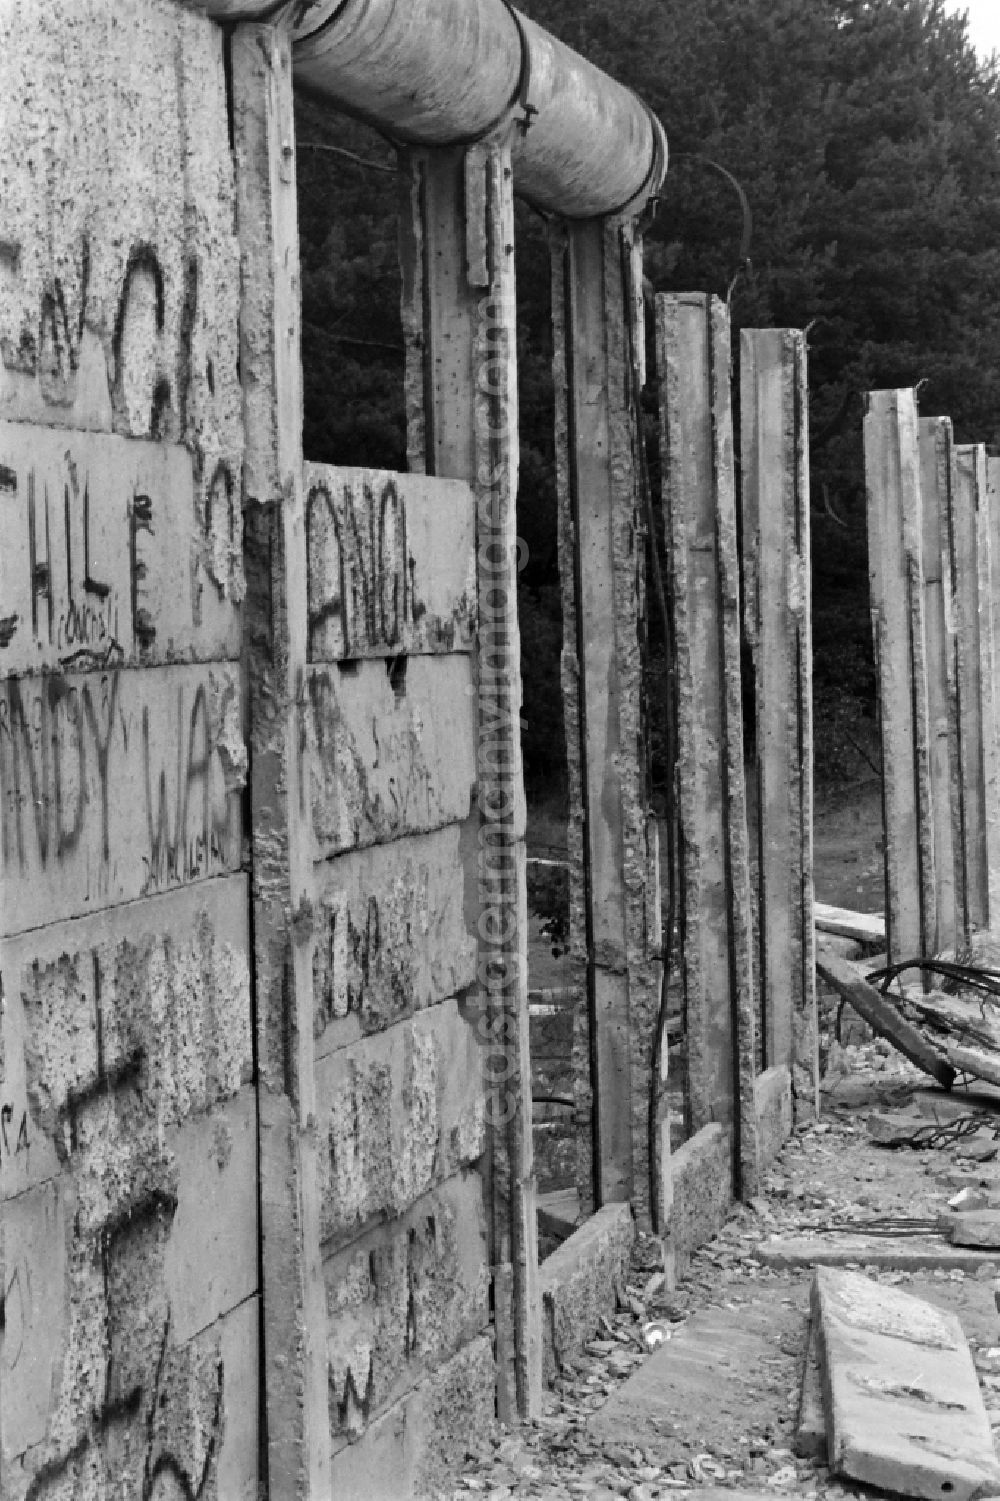 GDR picture archive: Berlin - Fragments of the decaying border fortifications and wall as well as security structures in the former border strip of the state border on a camp of the border troops in the district Steinstuecken in Berlin on the territory of the former GDR, German Democratic Republic